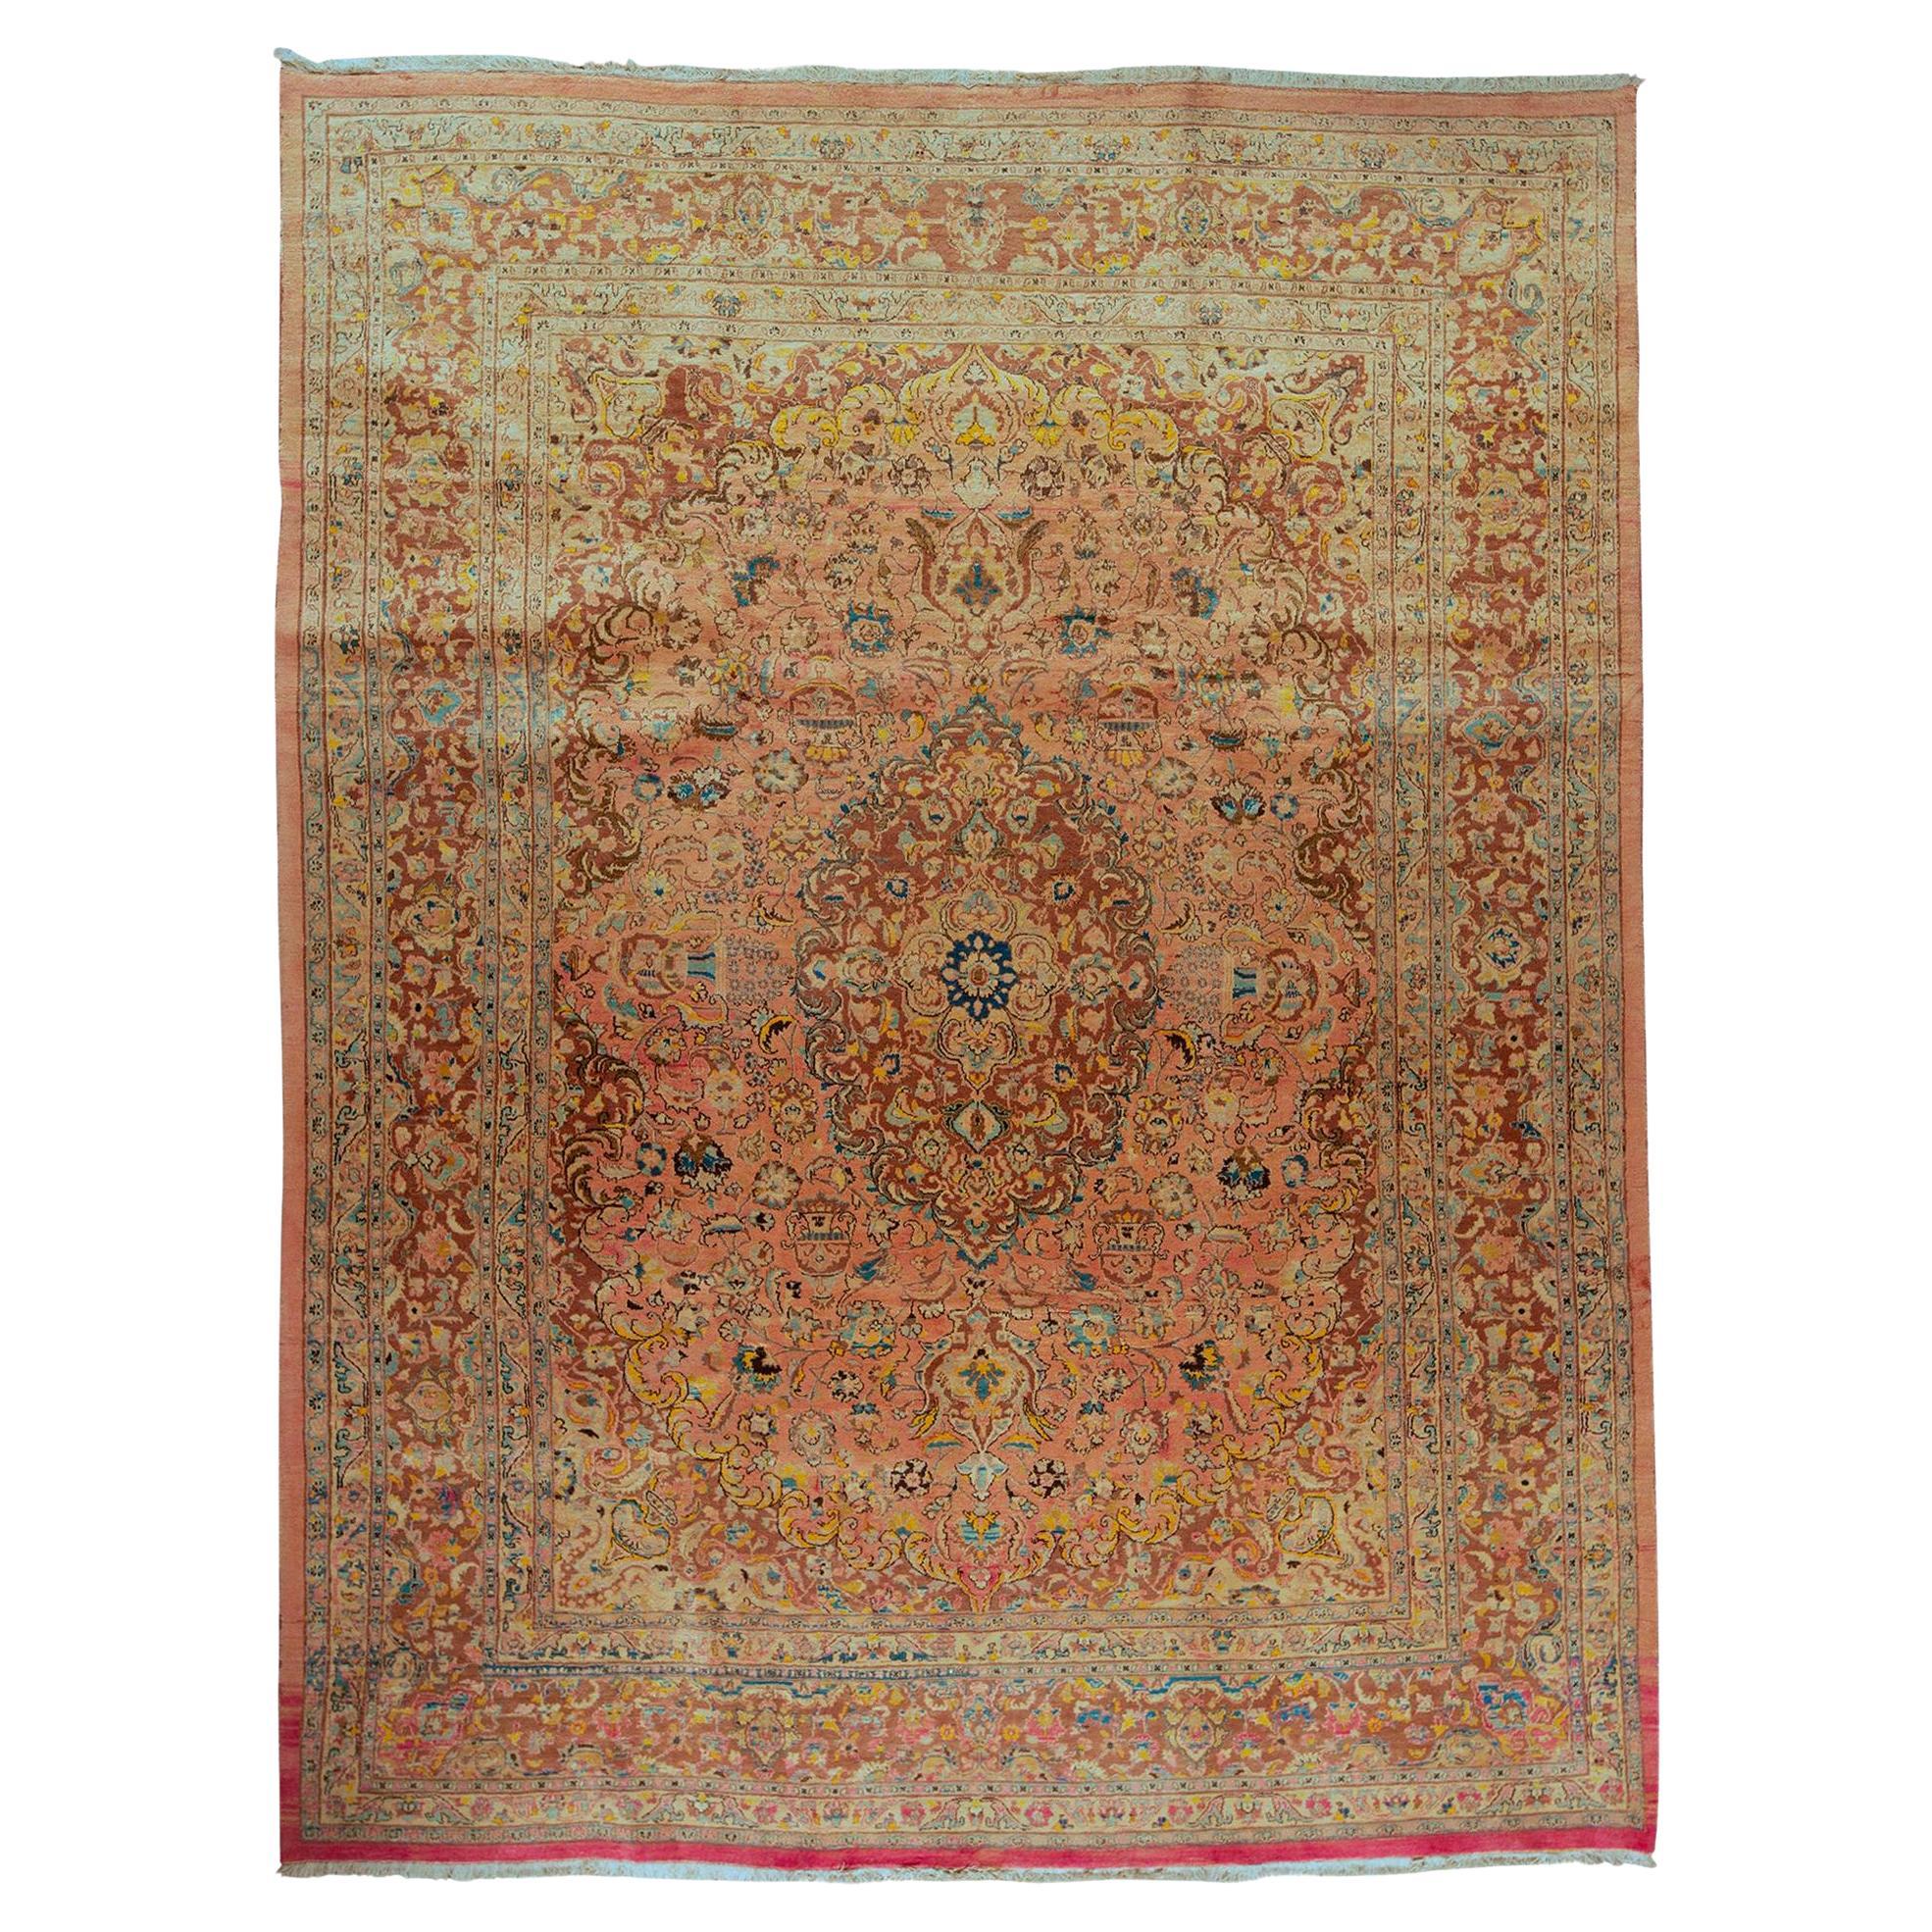 Antique Persian Fine Traditional Handwoven Luxury Wool Rose / Brown Rug